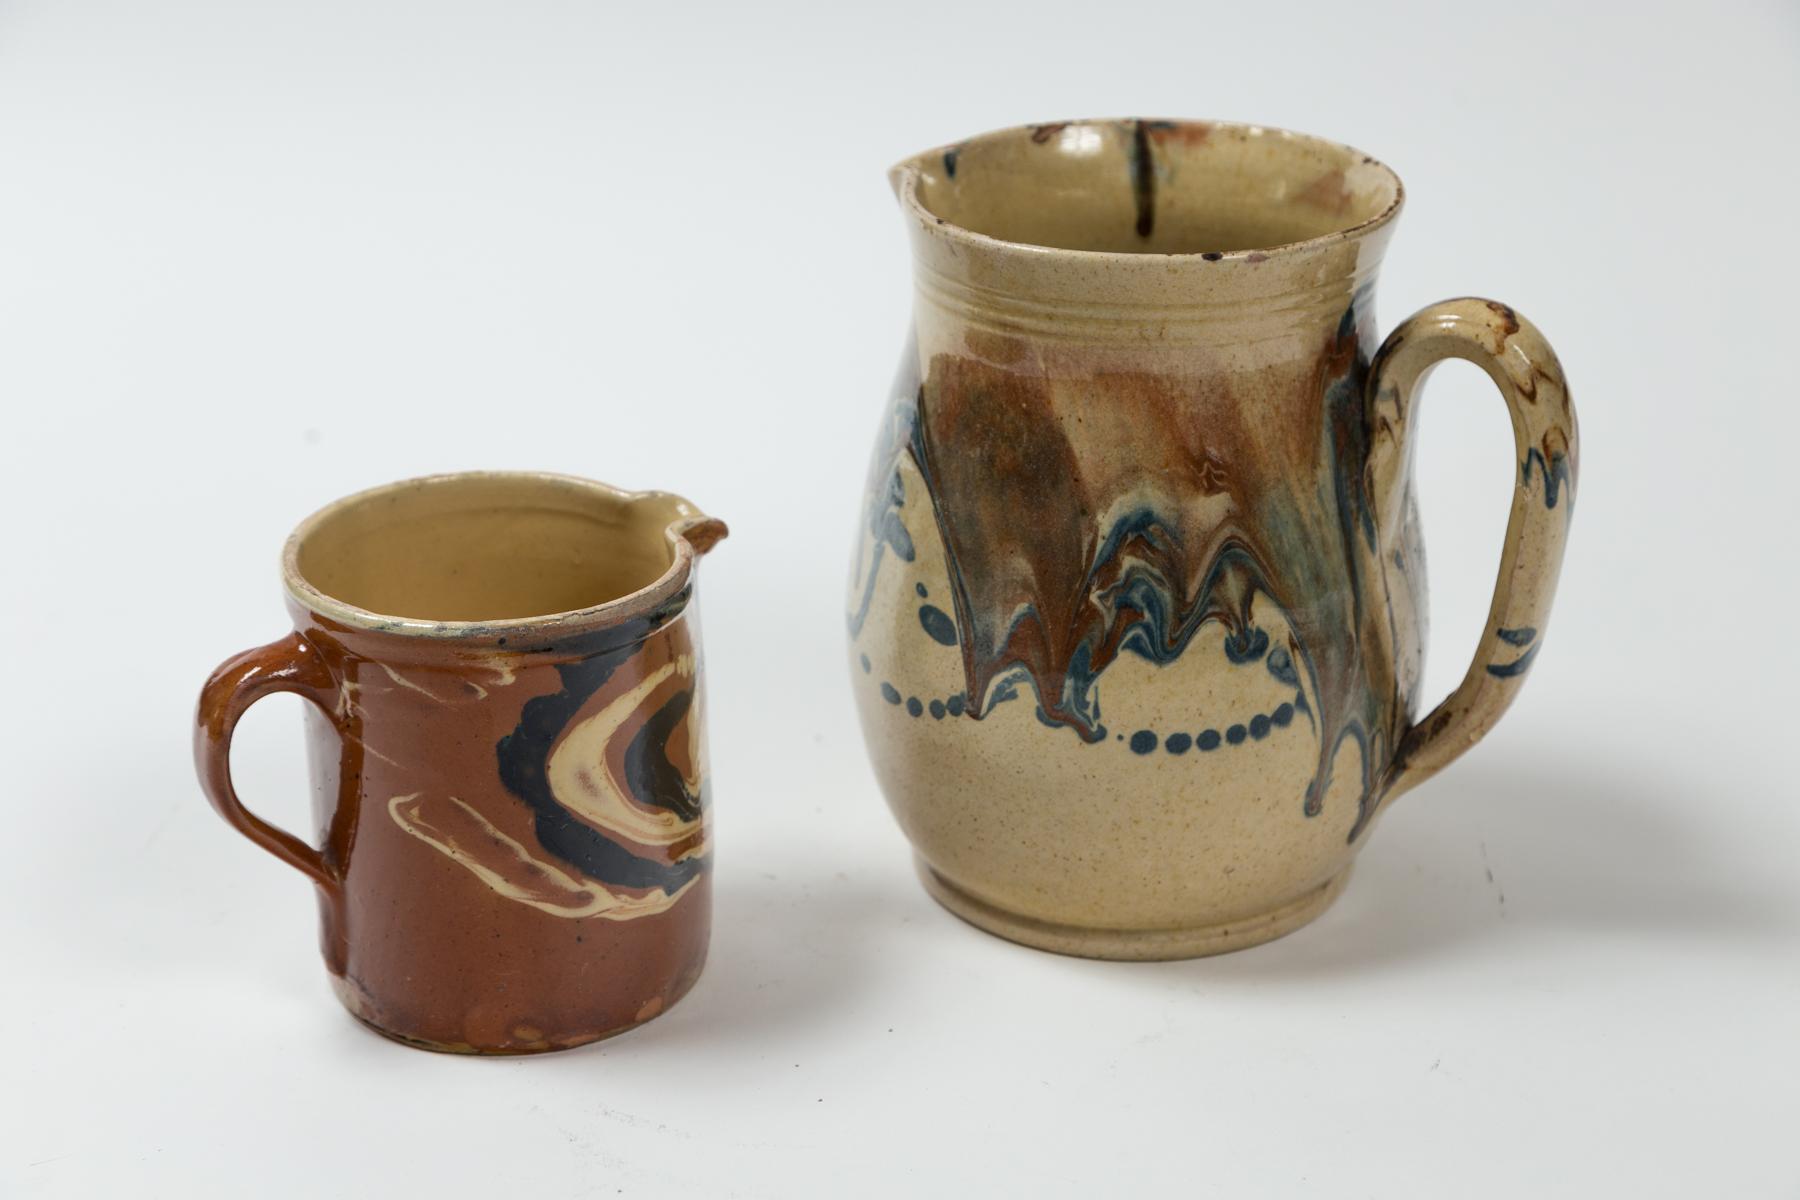 Two Antique Jaspé Pottery Pitchers, France, Late 19th Century. Striking marbleized slip application. From the Savoie region of France.